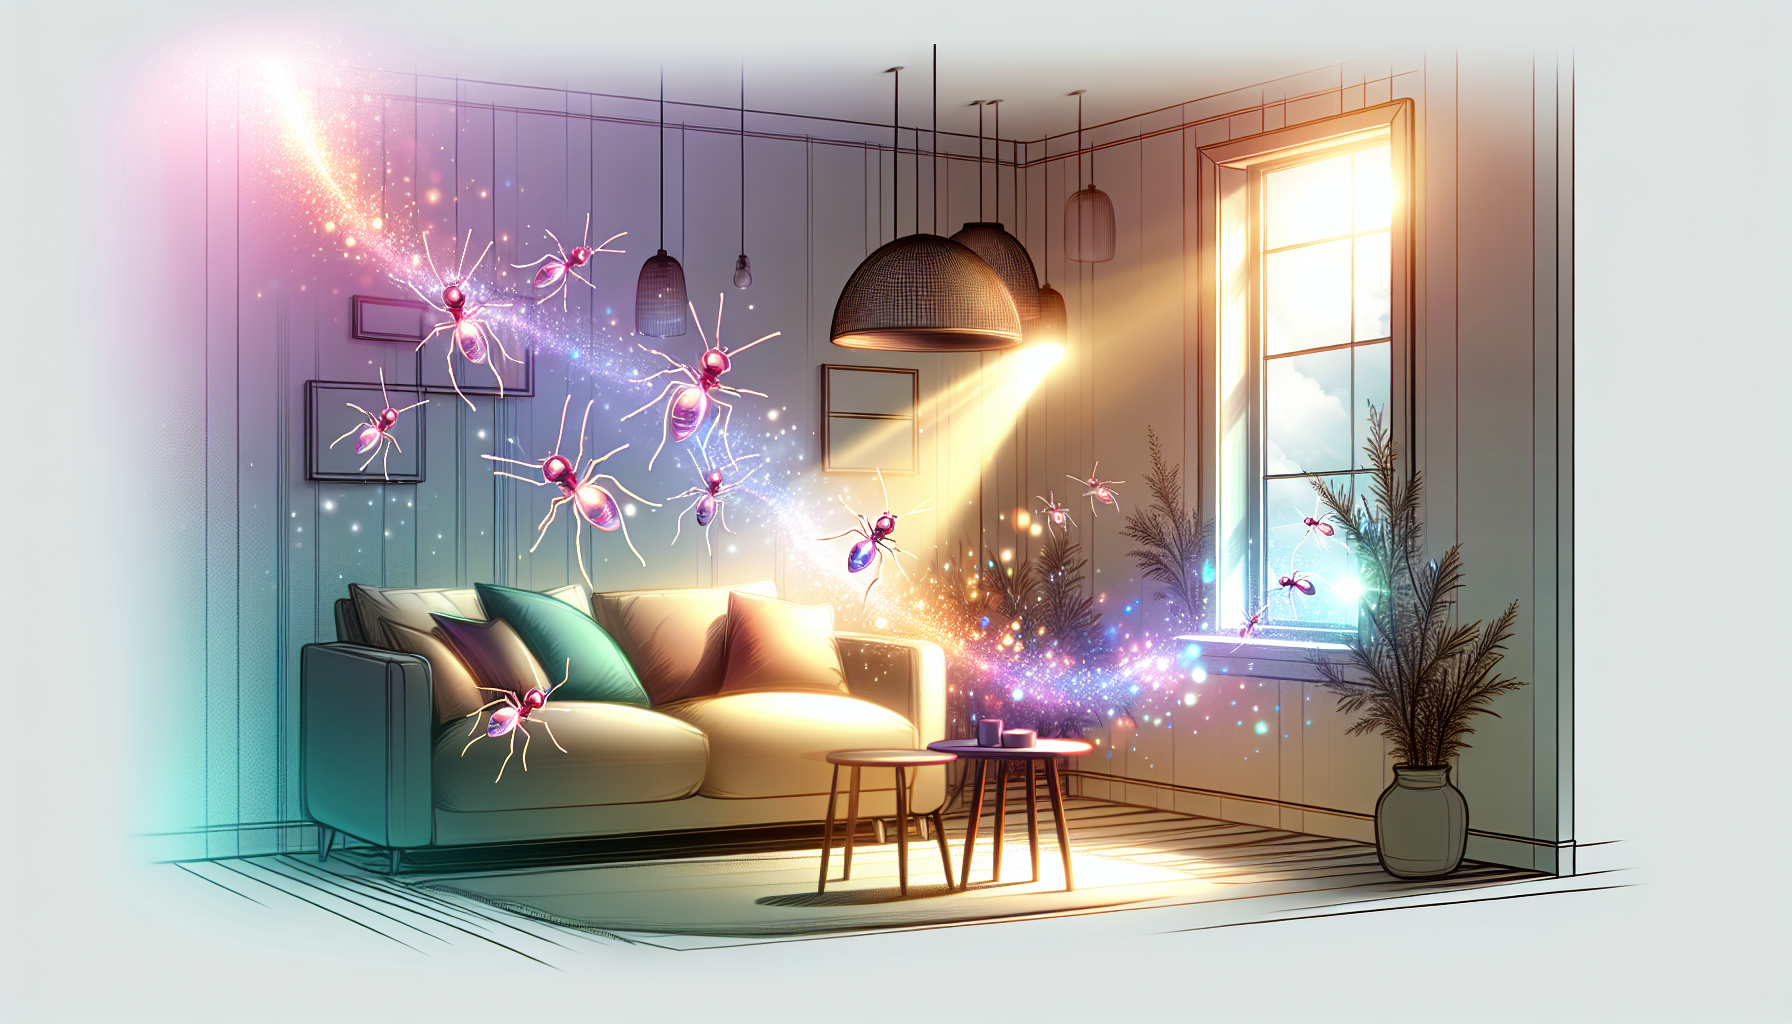 An ethereal scene depicting a trail of translucent ants moving through a cozy living room, each ant glowing with a soft, mystical light, symbolizing spiritual guidance and mystery in the home.